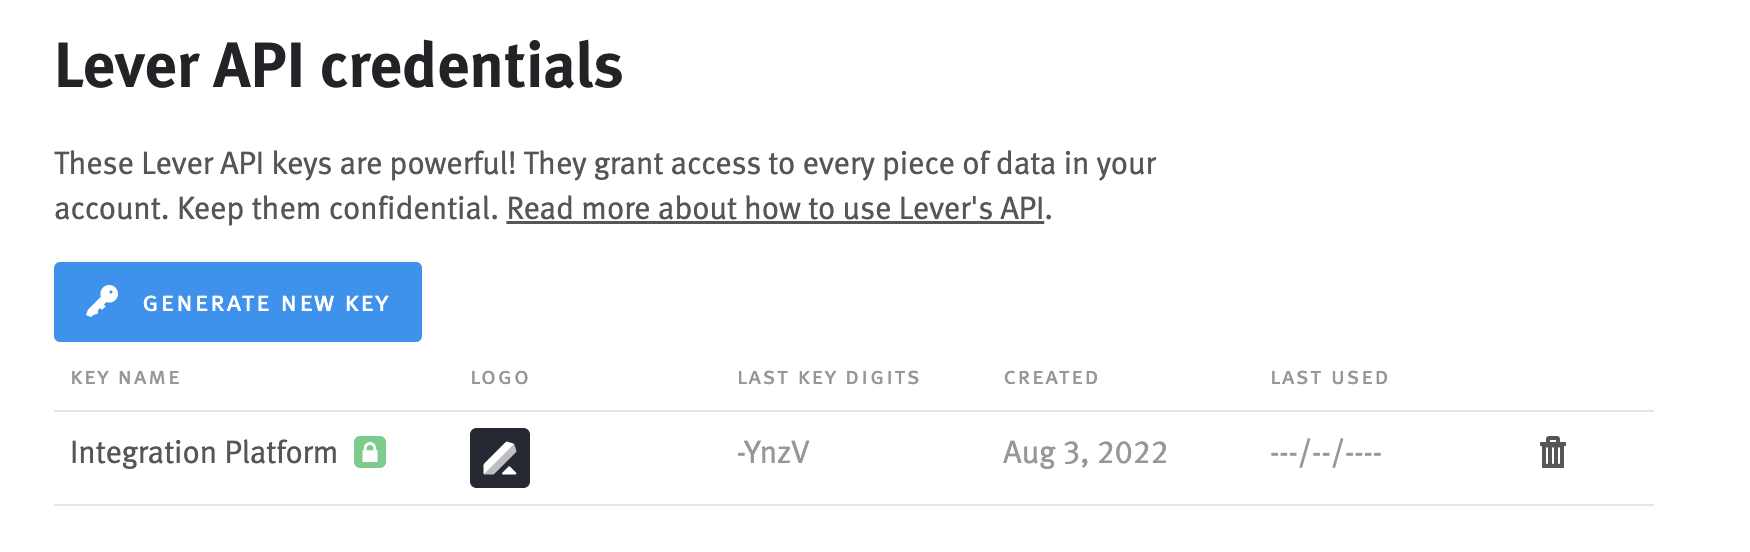 Close-up of Lever API credentials list with on API key listed.